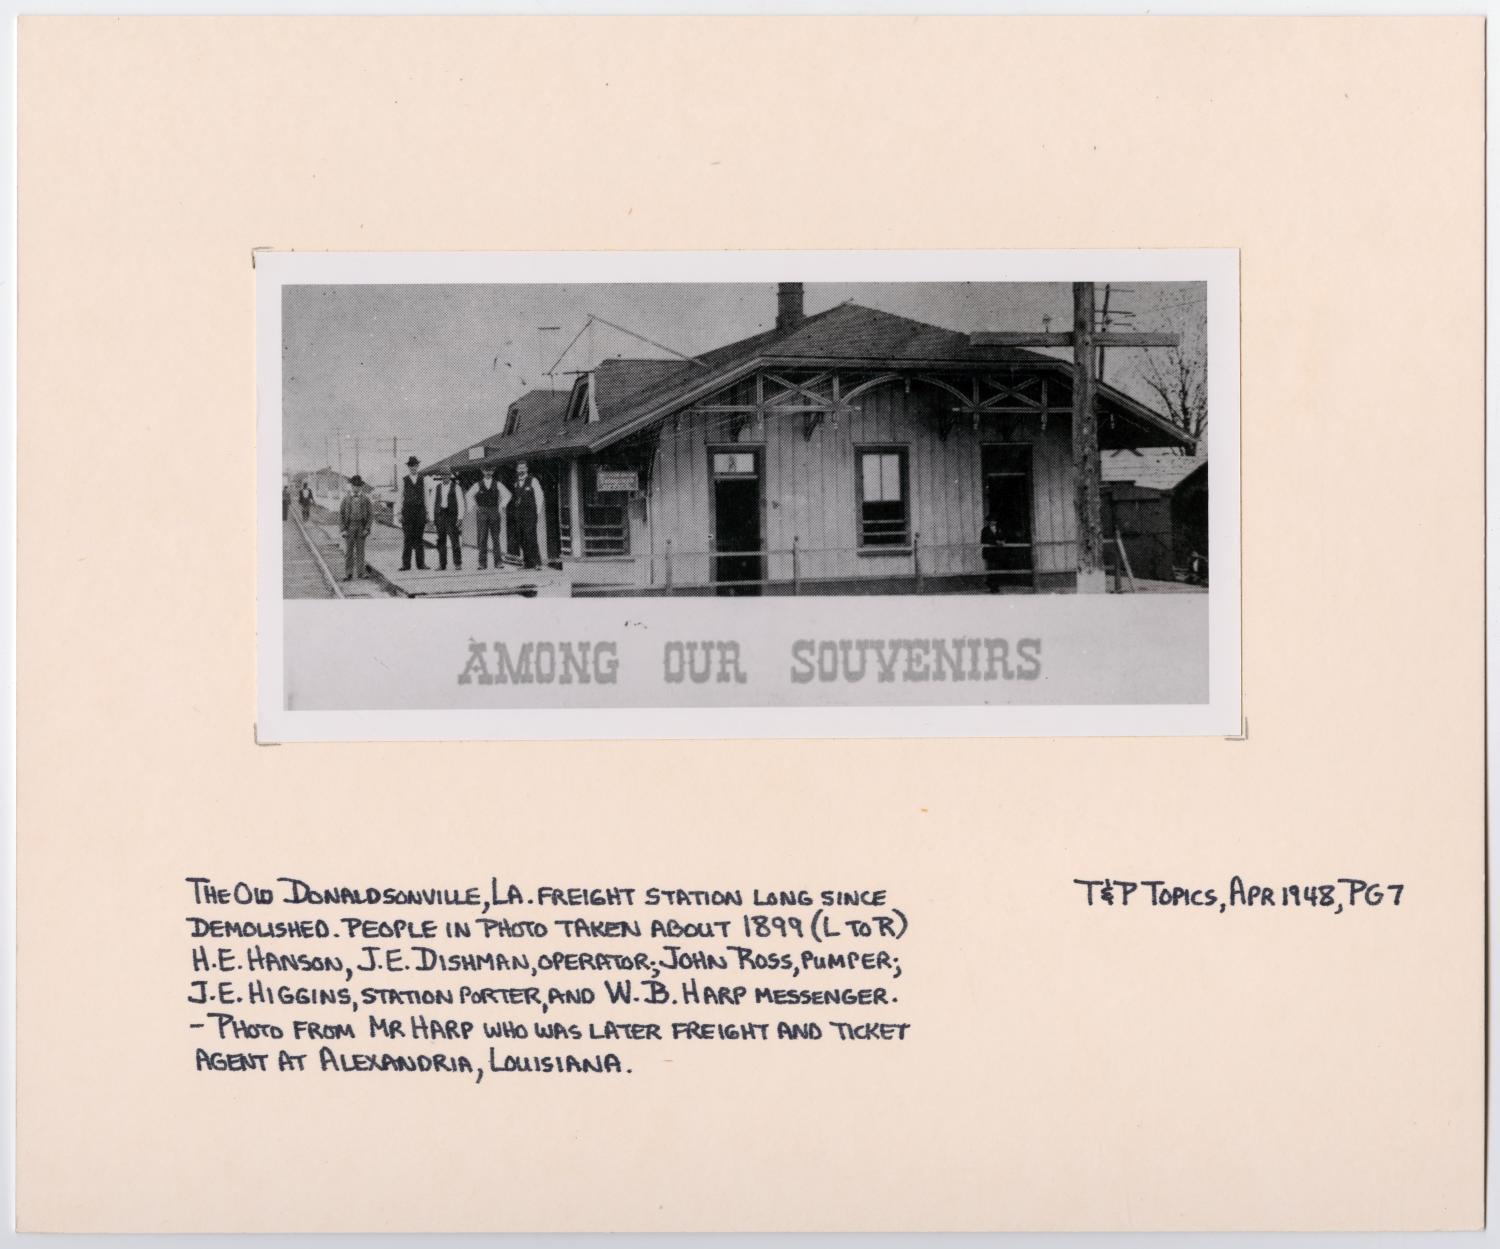 Images of Texas & Pacific Stations and Structures in Donaldsonville, LA